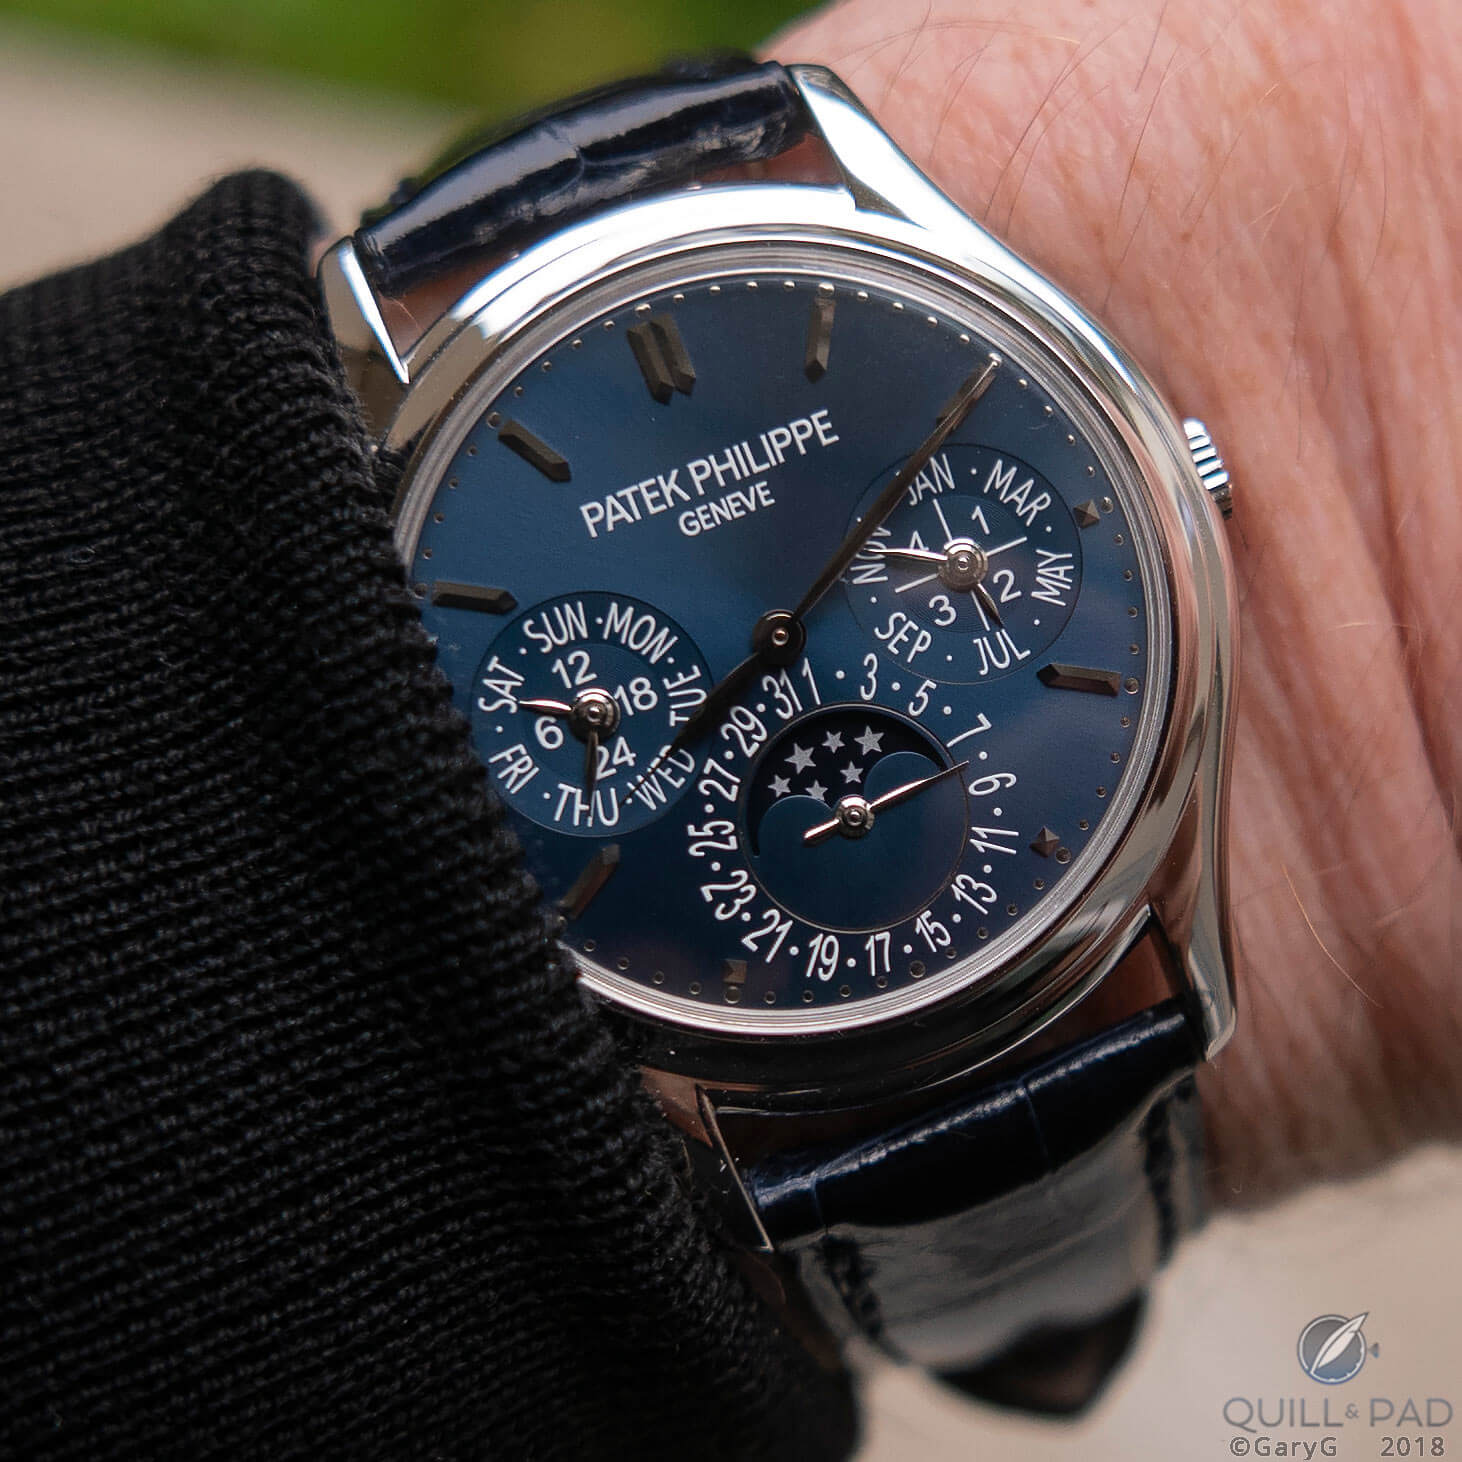 More detail in a future “Why I Bought It”: Patek Philippe Reference 3940P blue dial “Vintage”